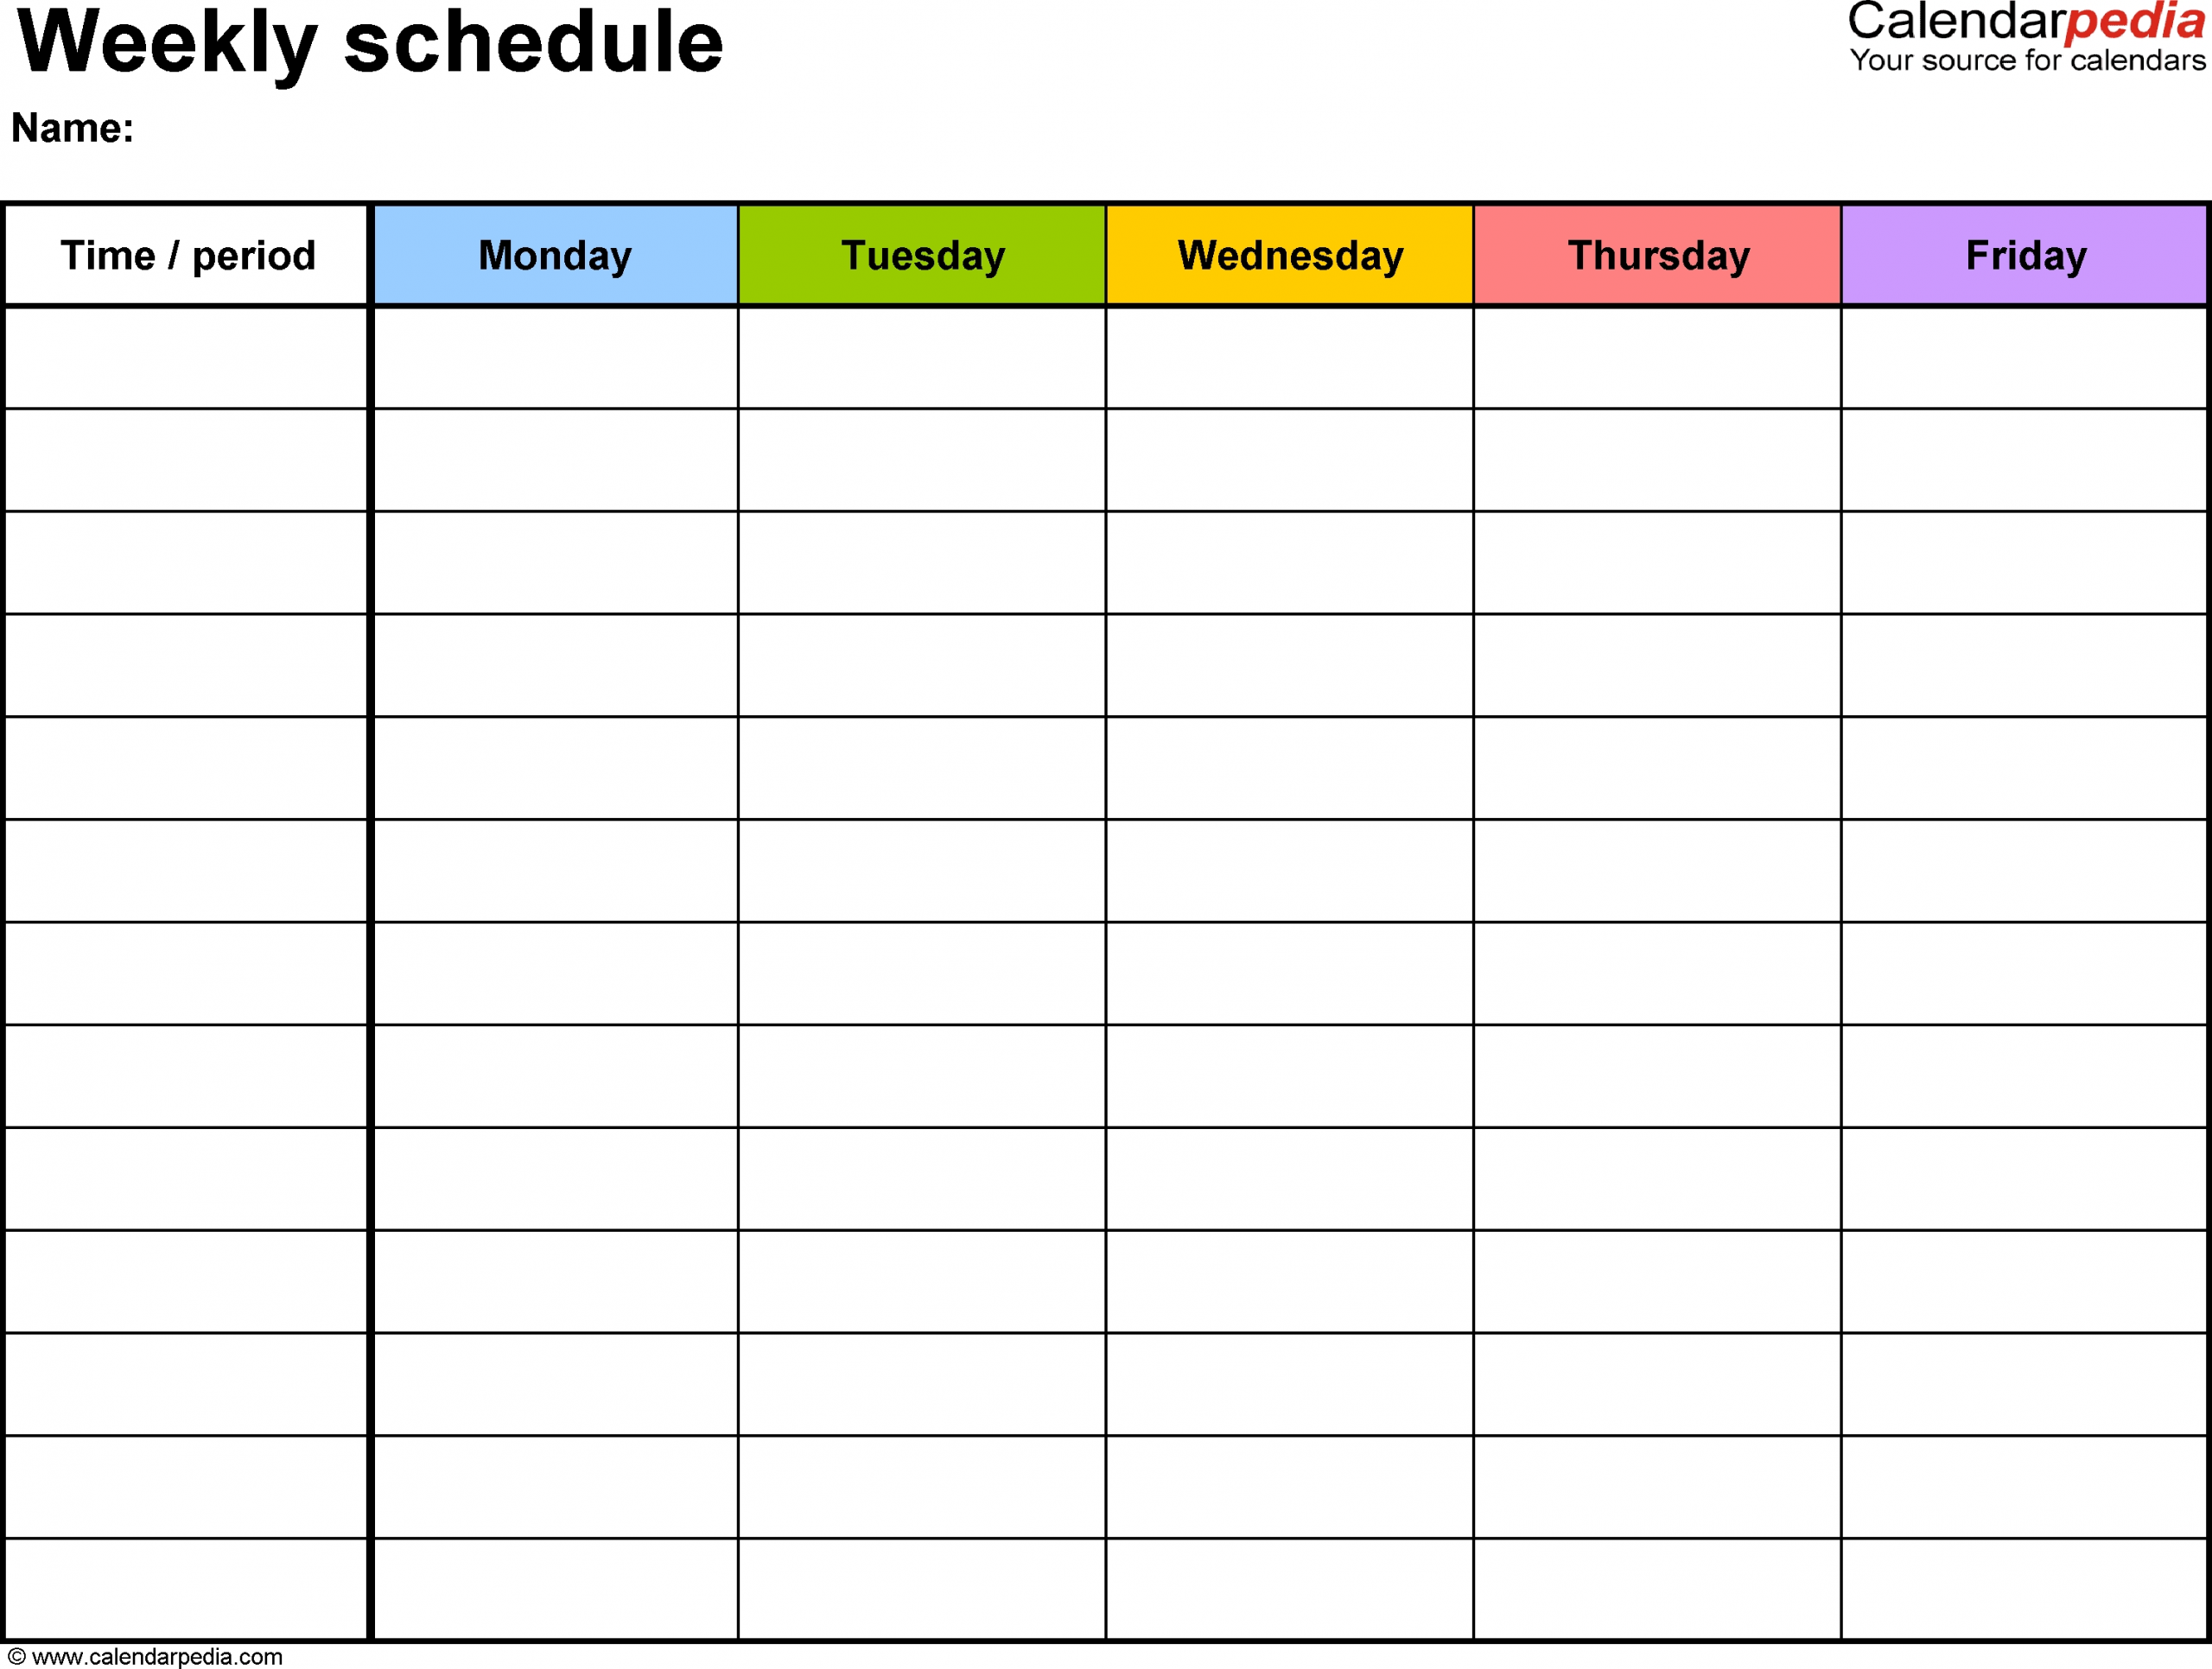 Free Weekly Schedule Templates For Excel - 18 Templates Free Printable Calendar Templates Excel